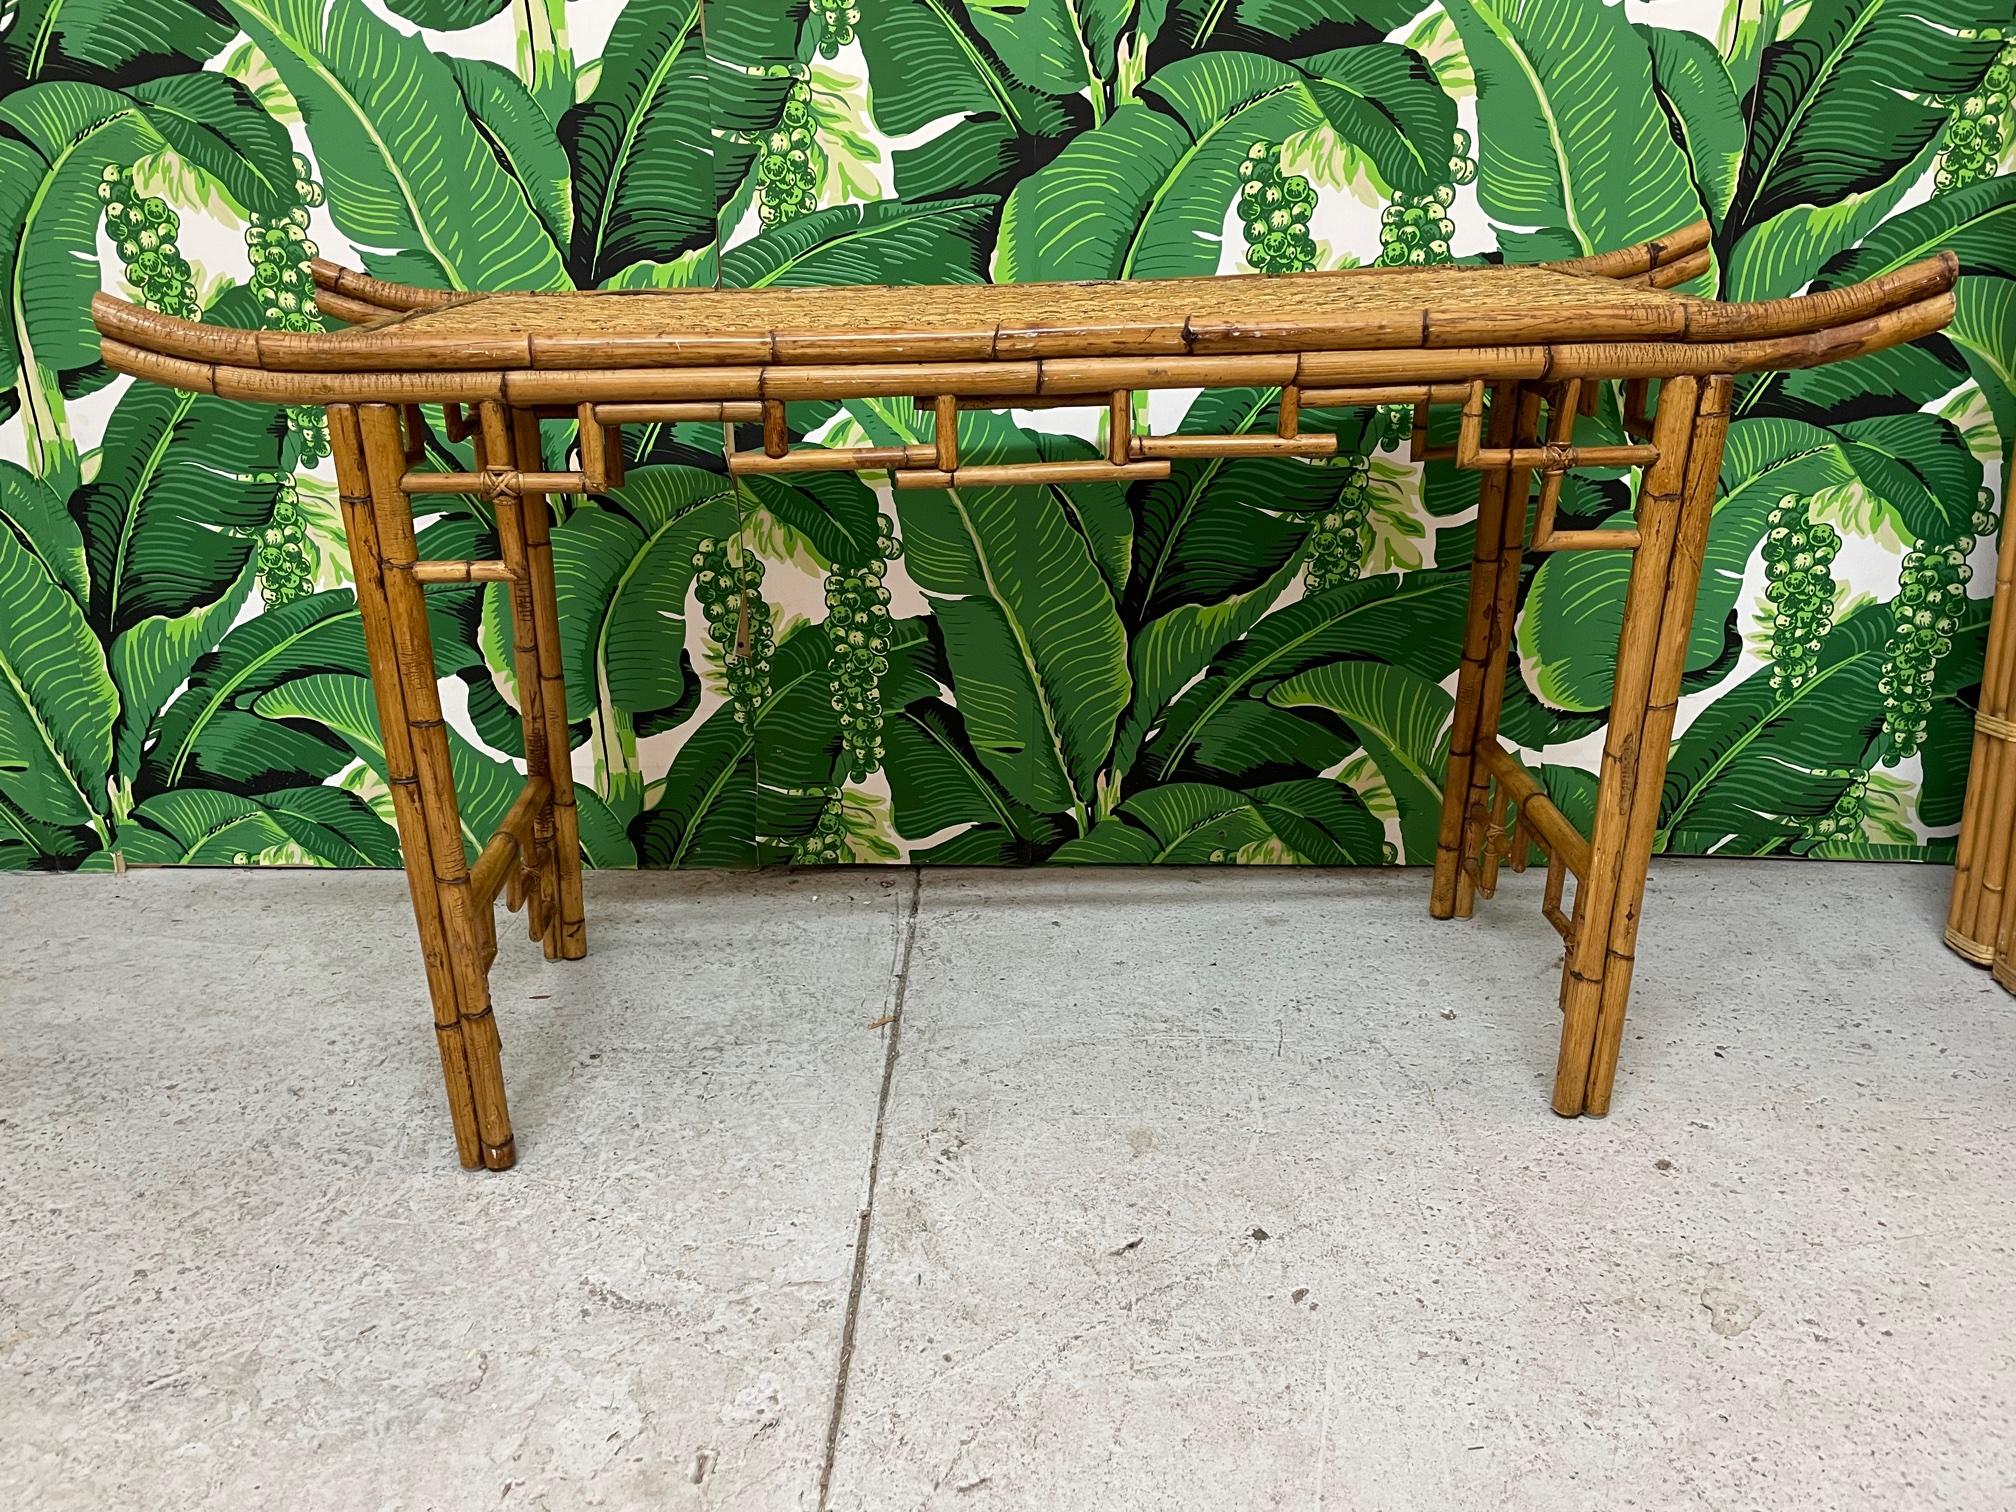 Vintage bamboo console or altar table features Asian chinoiserie styling with everted ends and decorative bamboo apron and spandrels. Top is veneered in woven wicker. Very good condition with only very minor imperfections consistent with age.